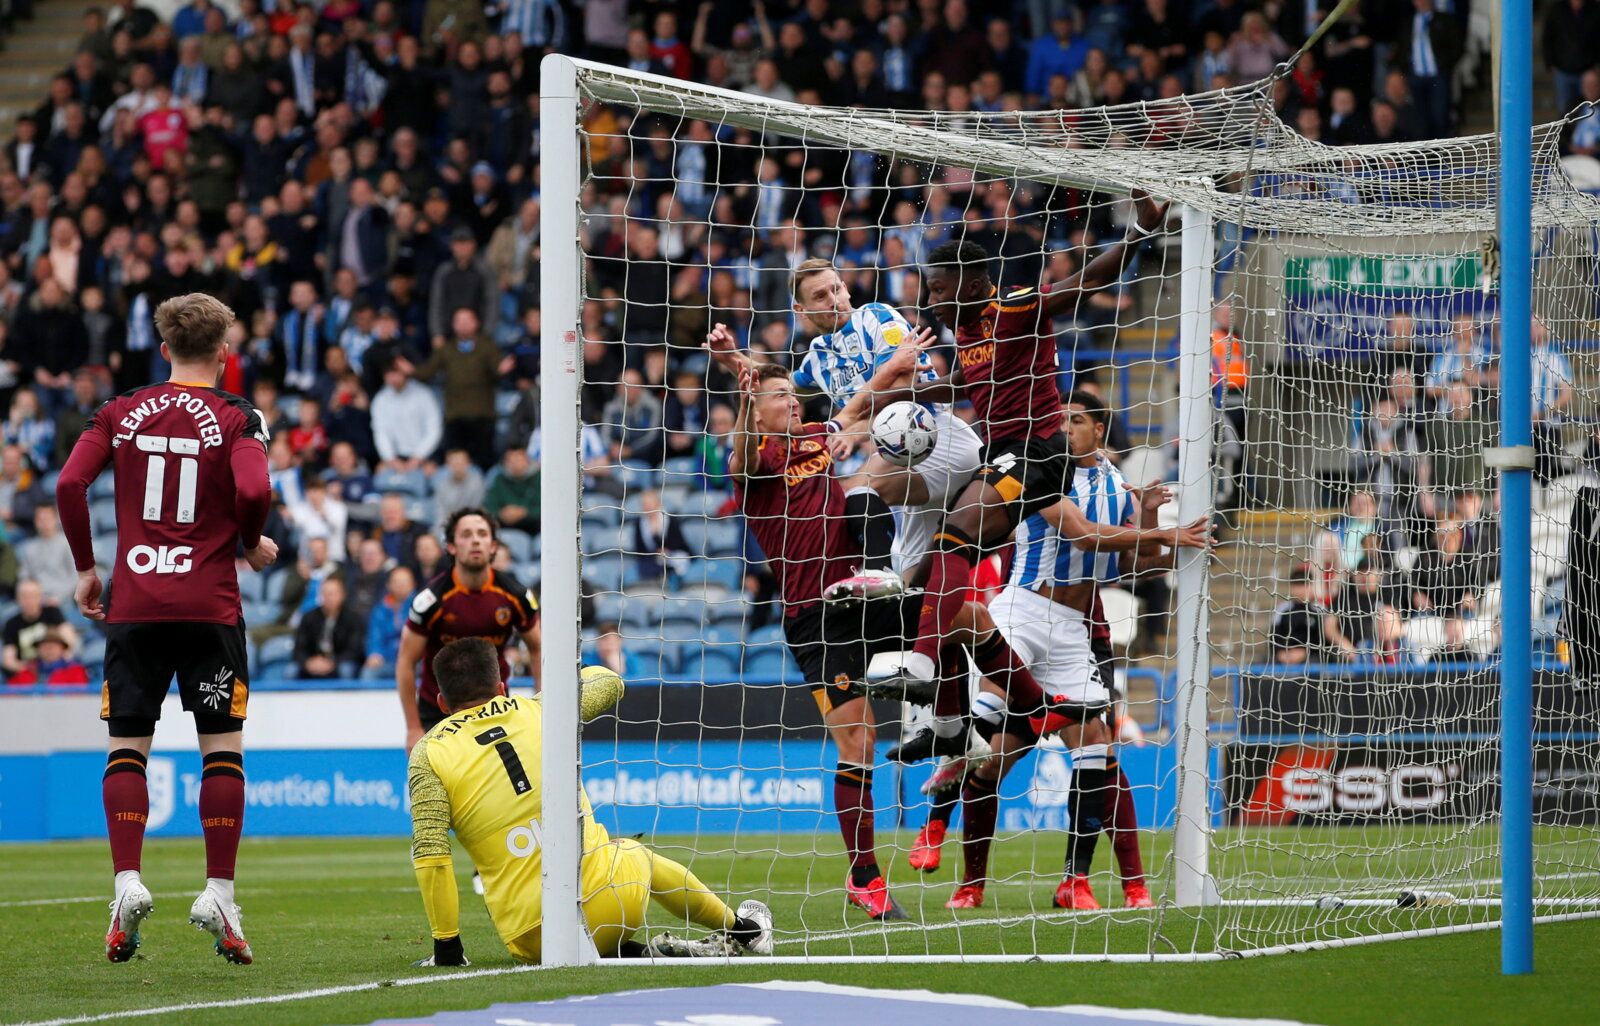 Soccer Football - Championship - Huddersfield Town v Hull City - John Smith's Stadium, Huddersfield, Britain - October 16, 2021 Huddersfield Town's Tom Lees scores their first goal   Action Images/Ed Sykes  EDITORIAL USE ONLY. No use with unauthorized audio, video, data, fixture lists, club/league logos or 